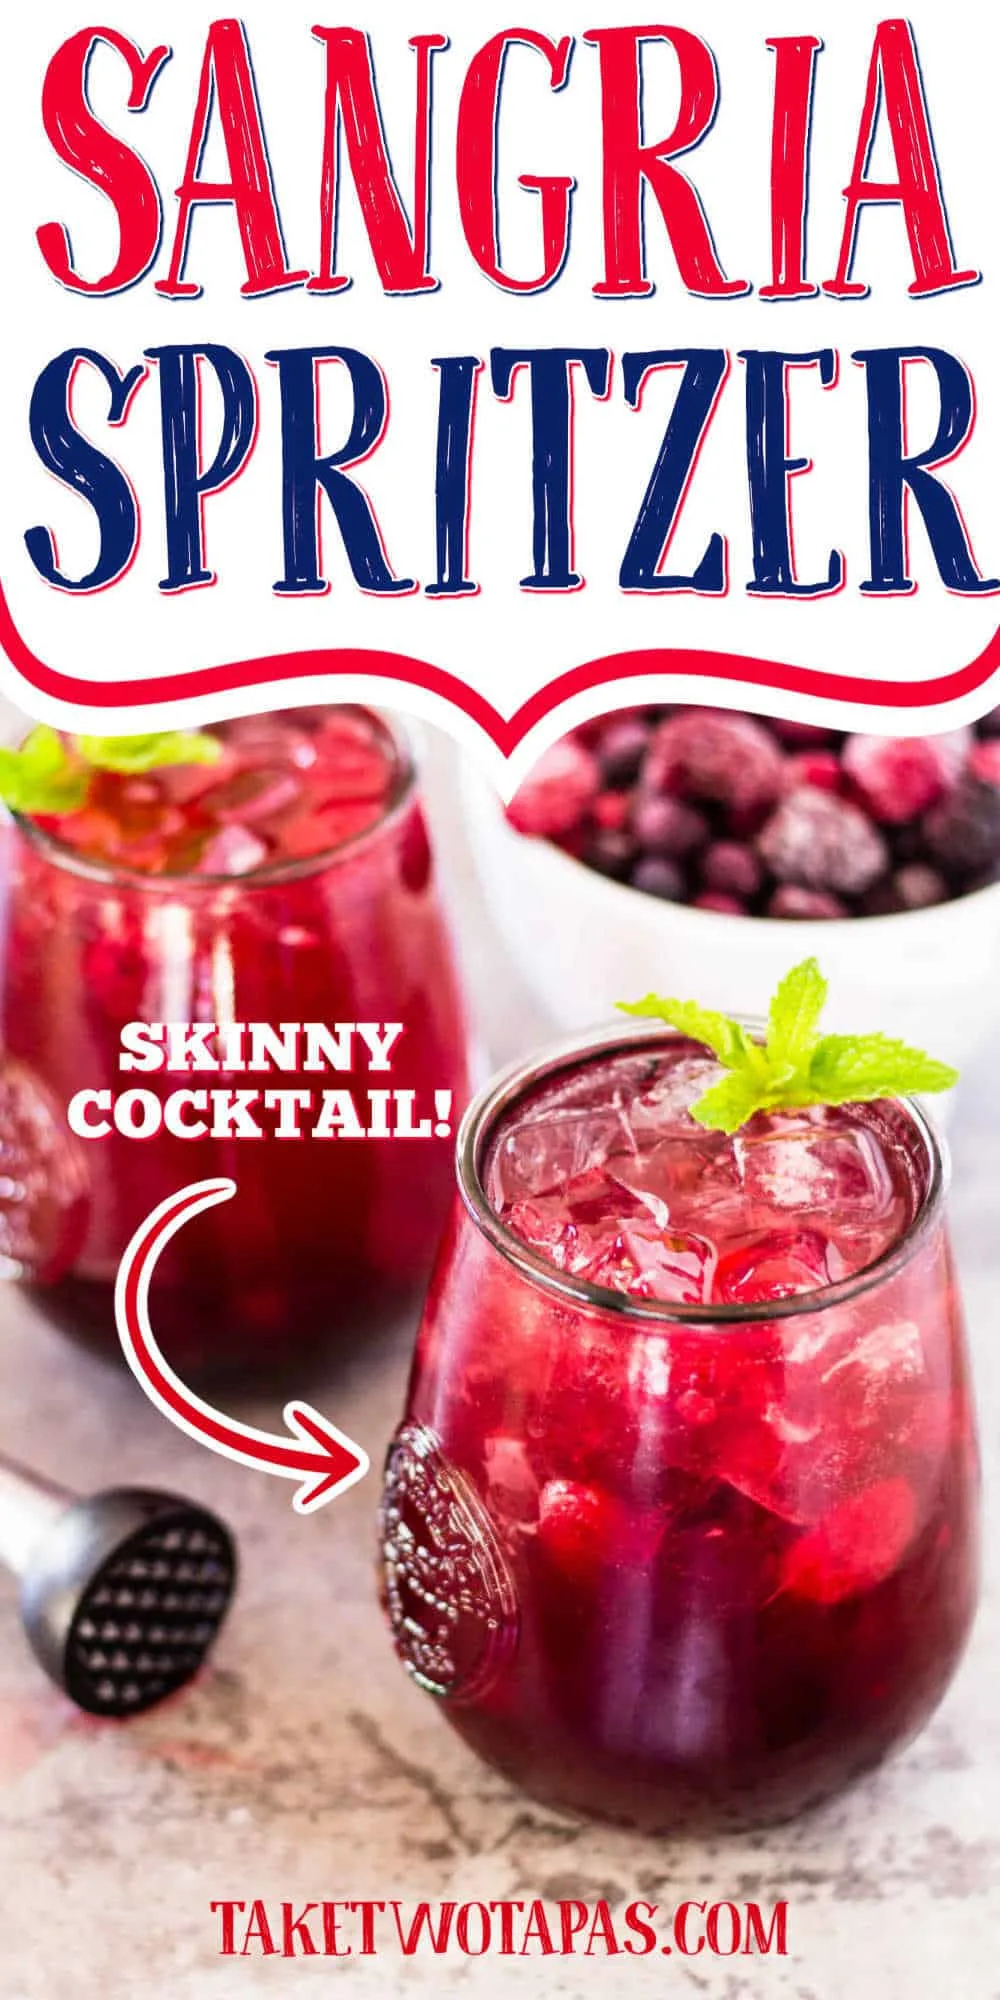 glass of wine with text "sangria spritzer"